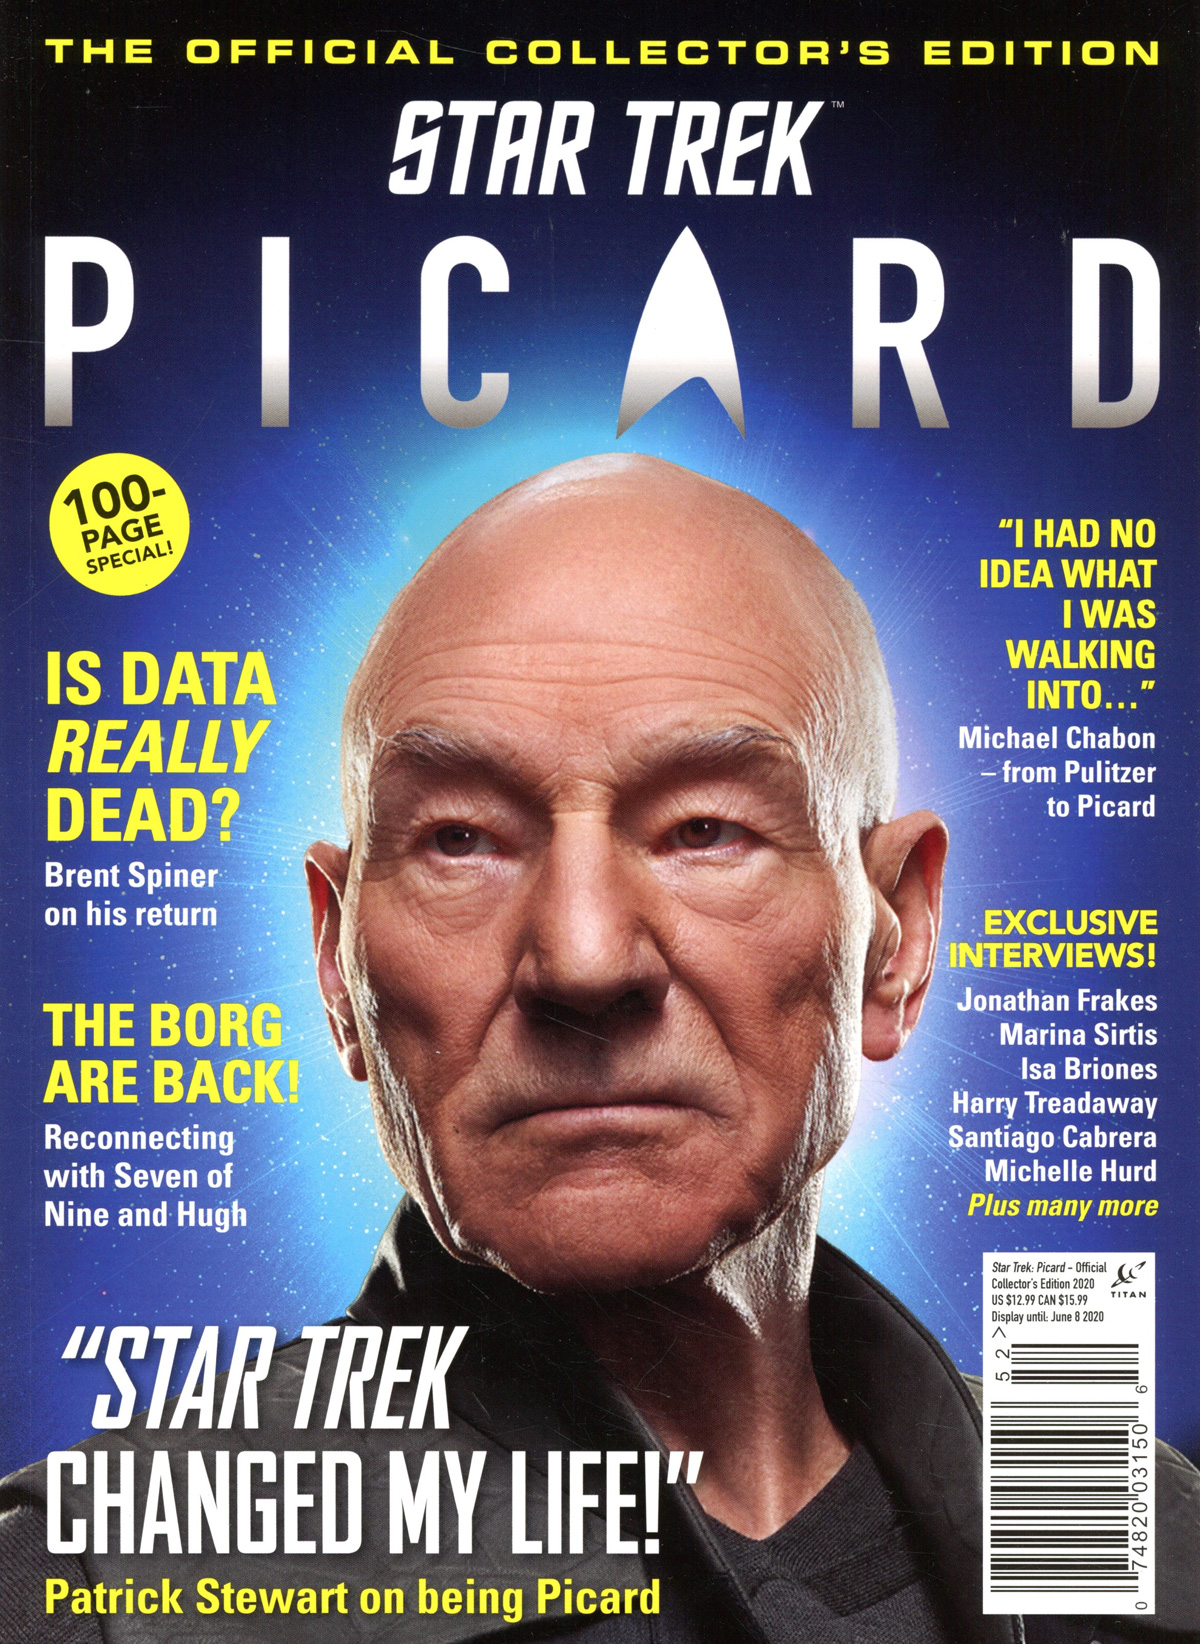 Star Trek Picard Official Collectors Edition 2020 Newsstand Edition